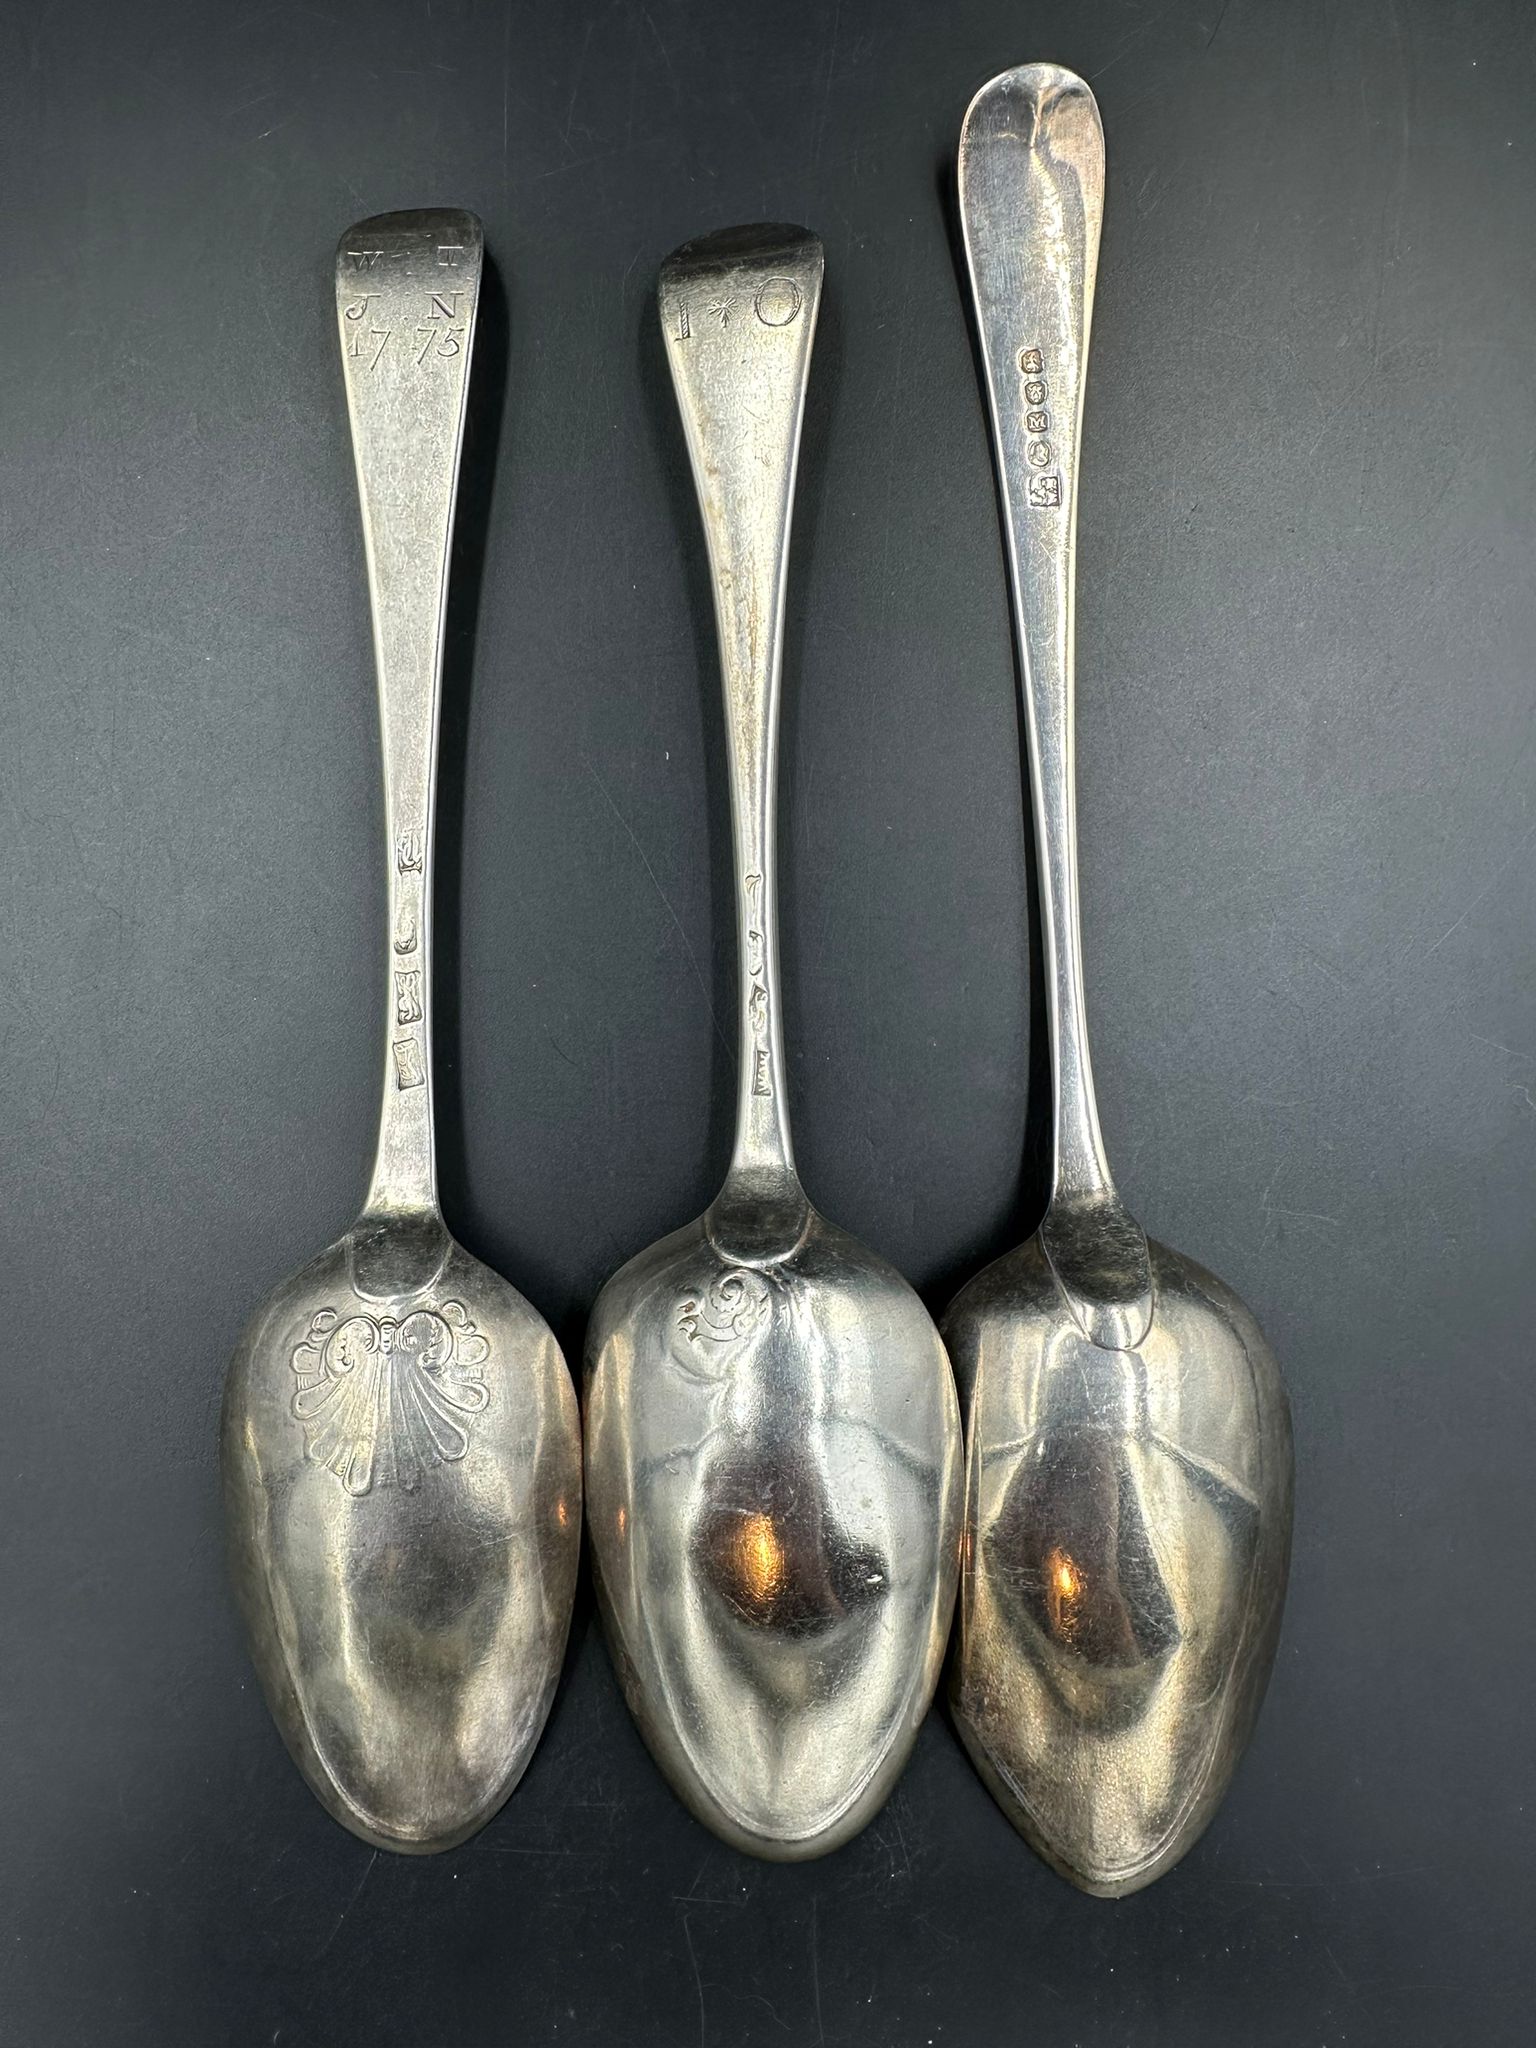 Three silver spoons,two late 18th Century and the other hallmarked for London 1807 - Image 2 of 6